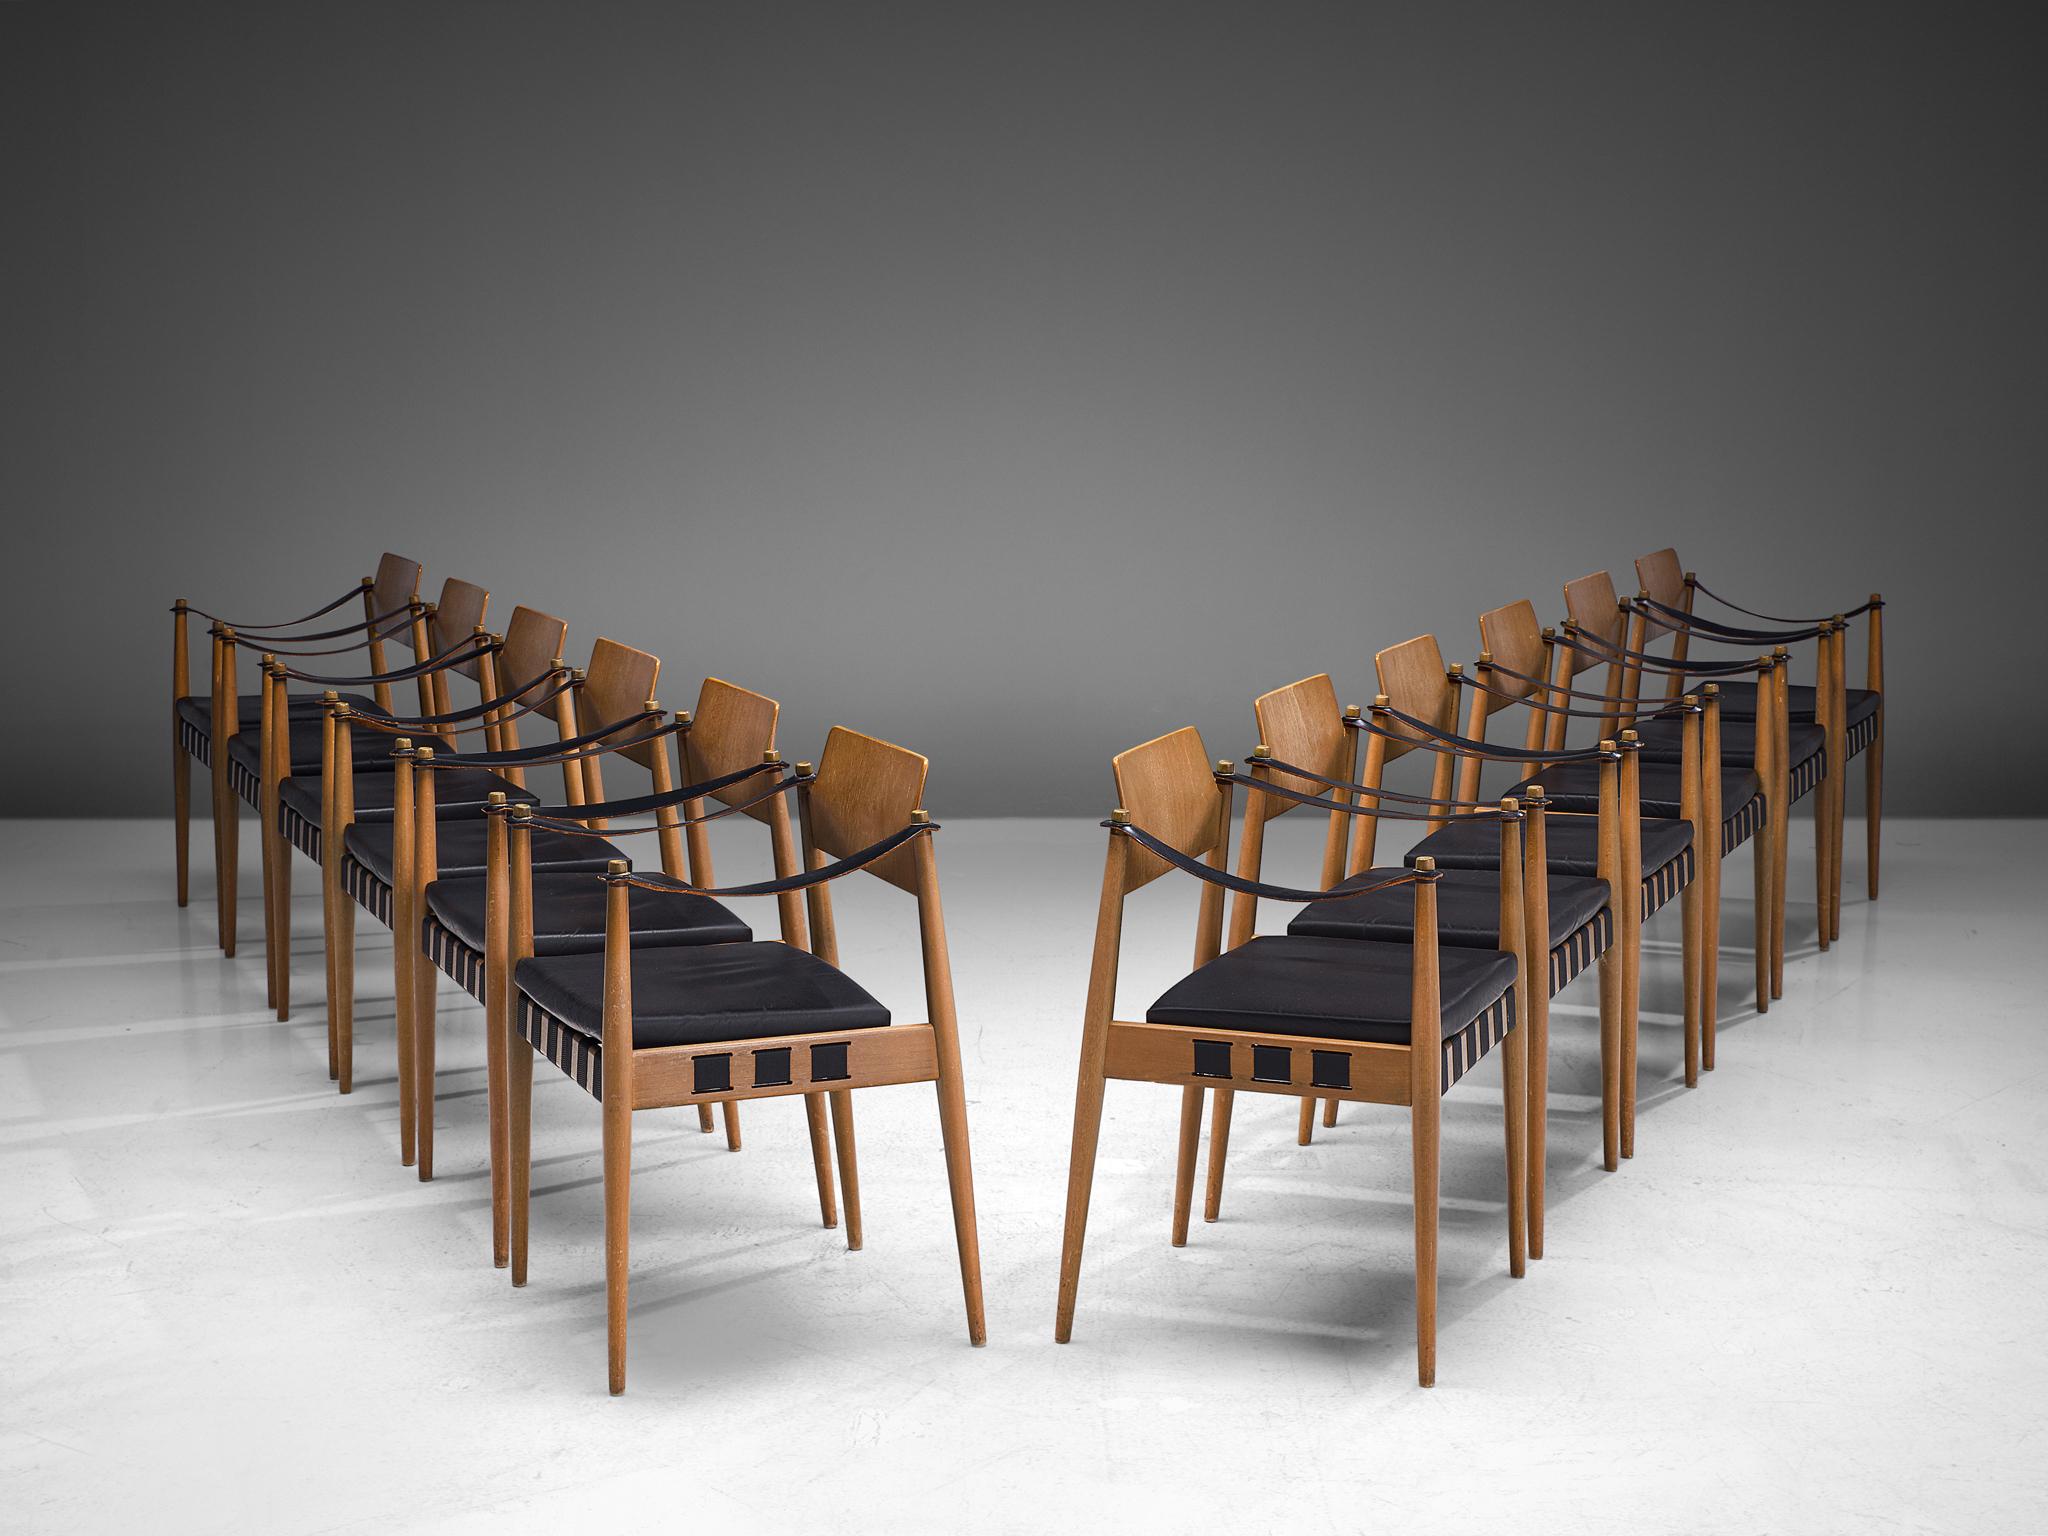 Egon Eiermann for Wilde and Spieth, set of twelve armchairs, beech, leather, leatherette, Germany, 1960s

Famous postwar German architect Egon Eiermann designed these armchairs for German manufacturer Wilde + Spieth in the early 1960s. This